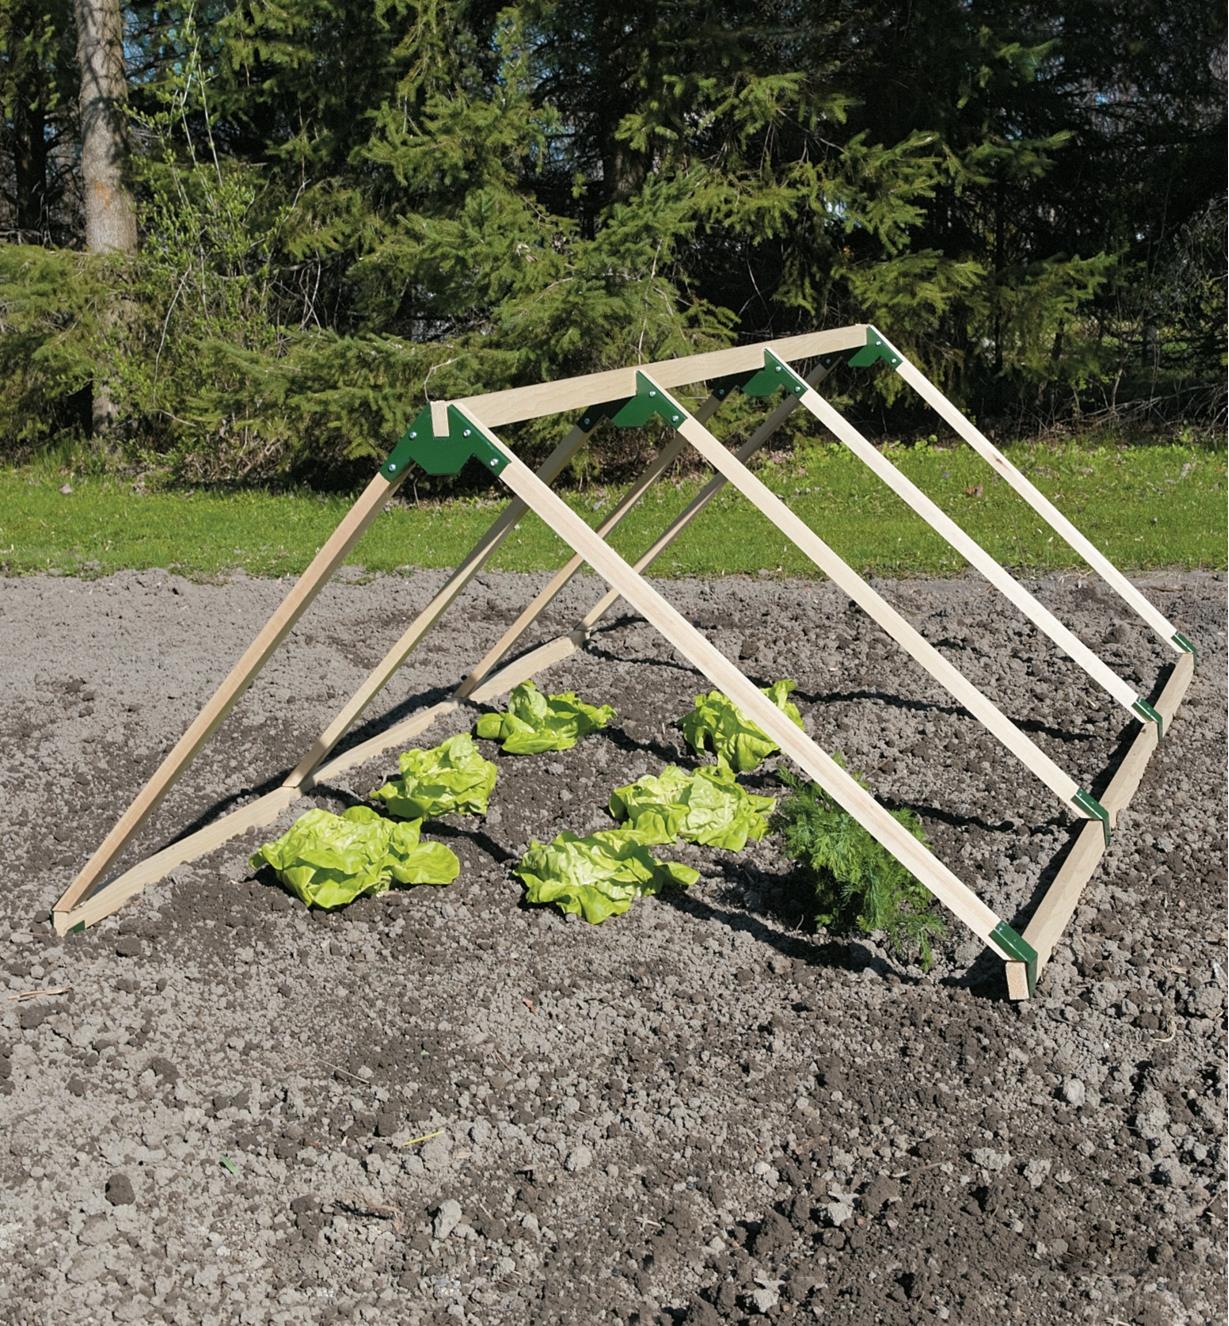 Garden-frame bracket sets used to create a triangular structure over a garden bed